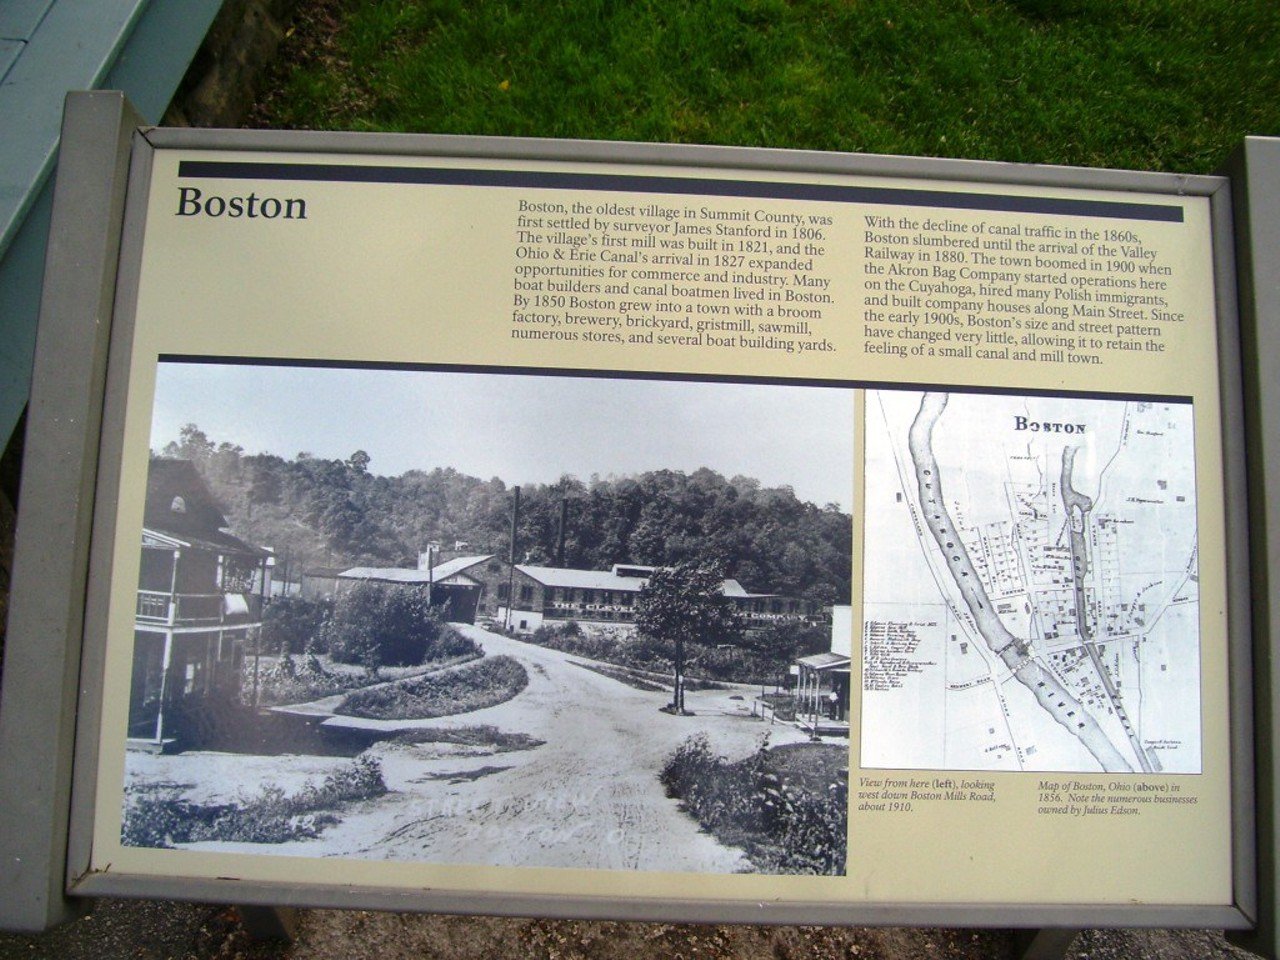 A bit of history of Boston Township in Summit County, also known as Helltown